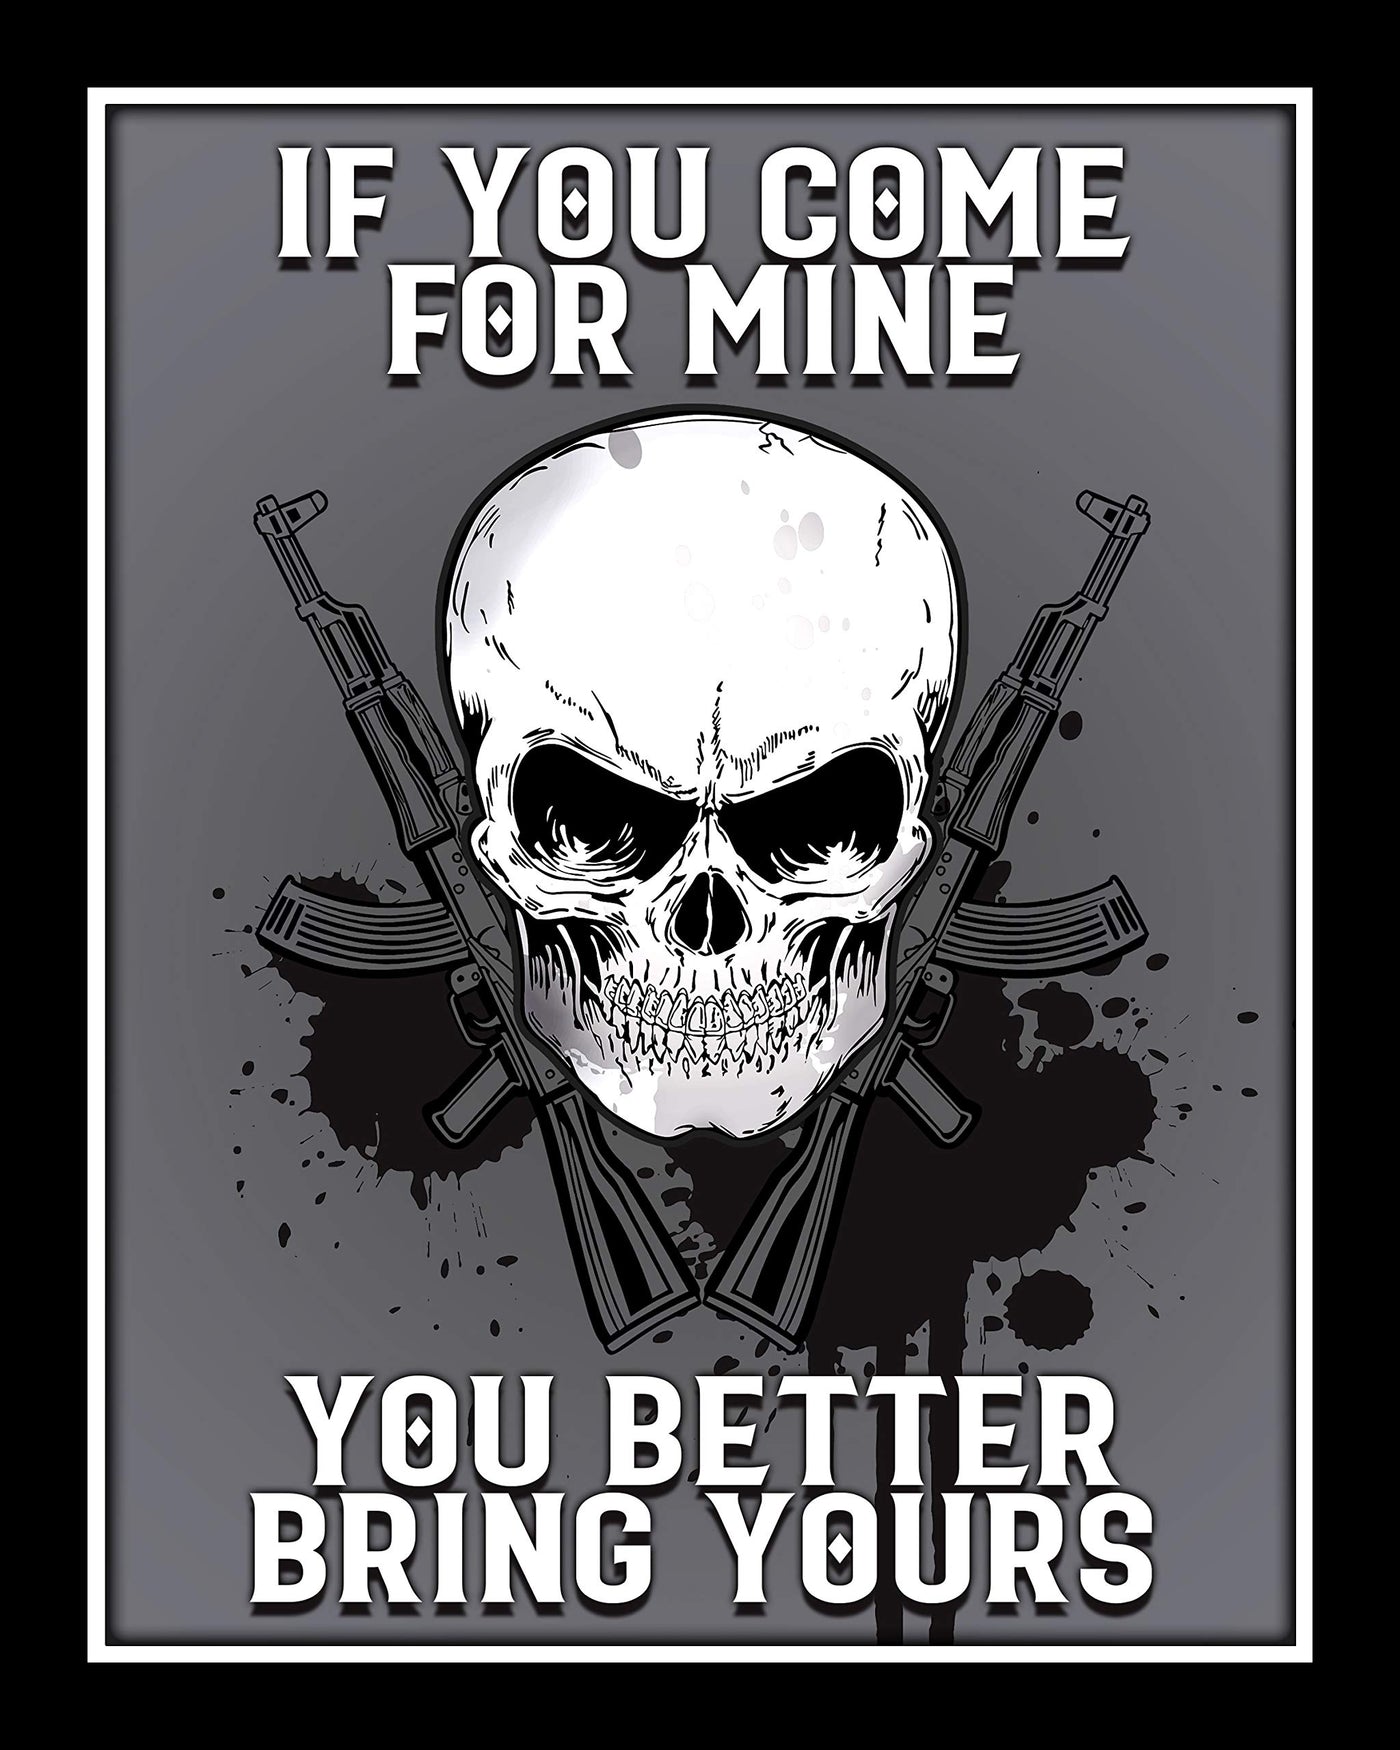 If You Come For Mine-Better Bring Yours Funny Patriotic Wall Art-8 x10" Wall Decor Print w/Skull & Guns-Ready To Frame. Pro-Second Amendment Print for Home-Cave-Garage-Gun Shop Decor. Great Gift!